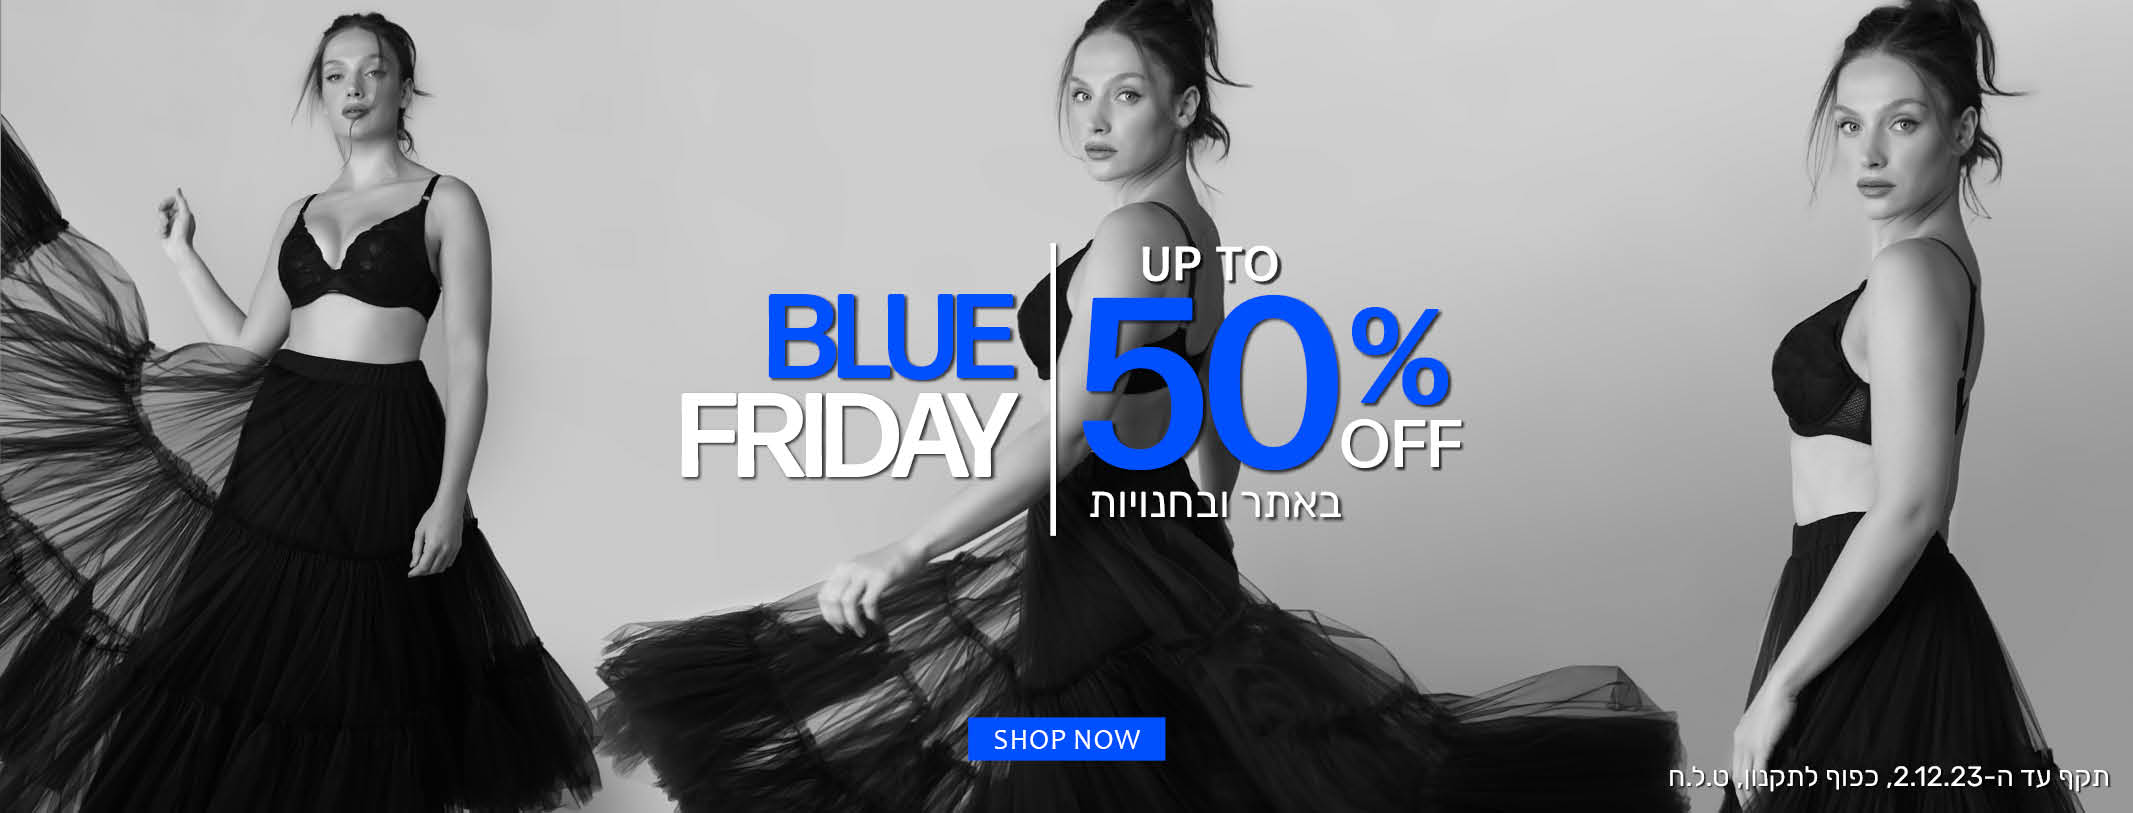 blue friday up to 50% off